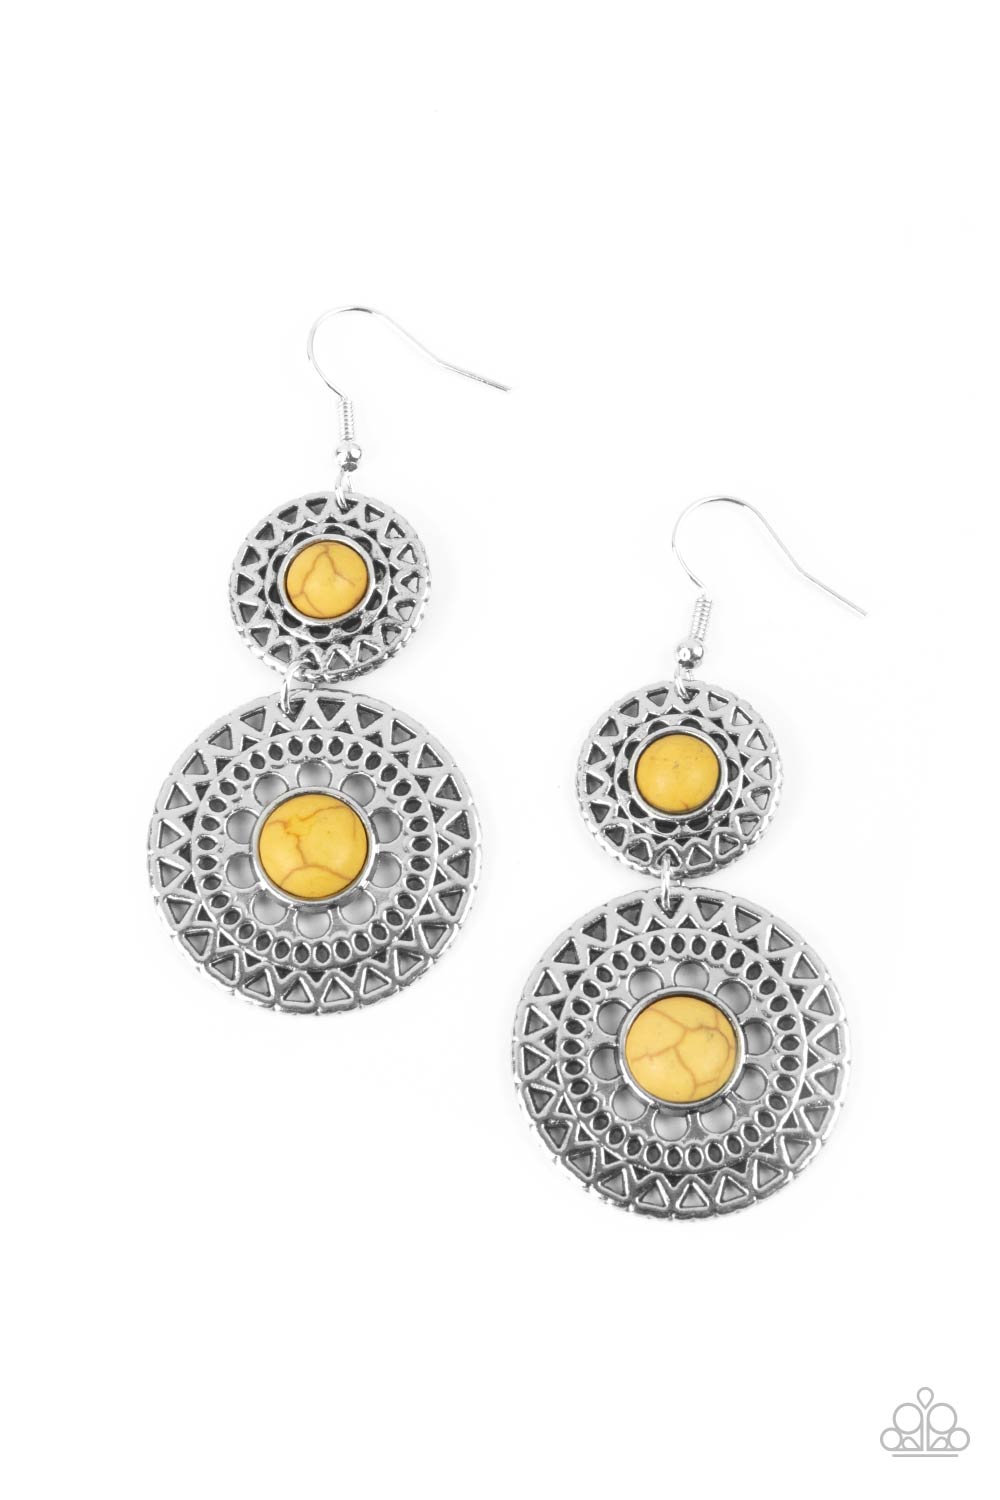 Sunny Sahara Yellow Stone and Silver Earrings - Paparazzi Accessories- lightbox - CarasShop.com - $5 Jewelry by Cara Jewels